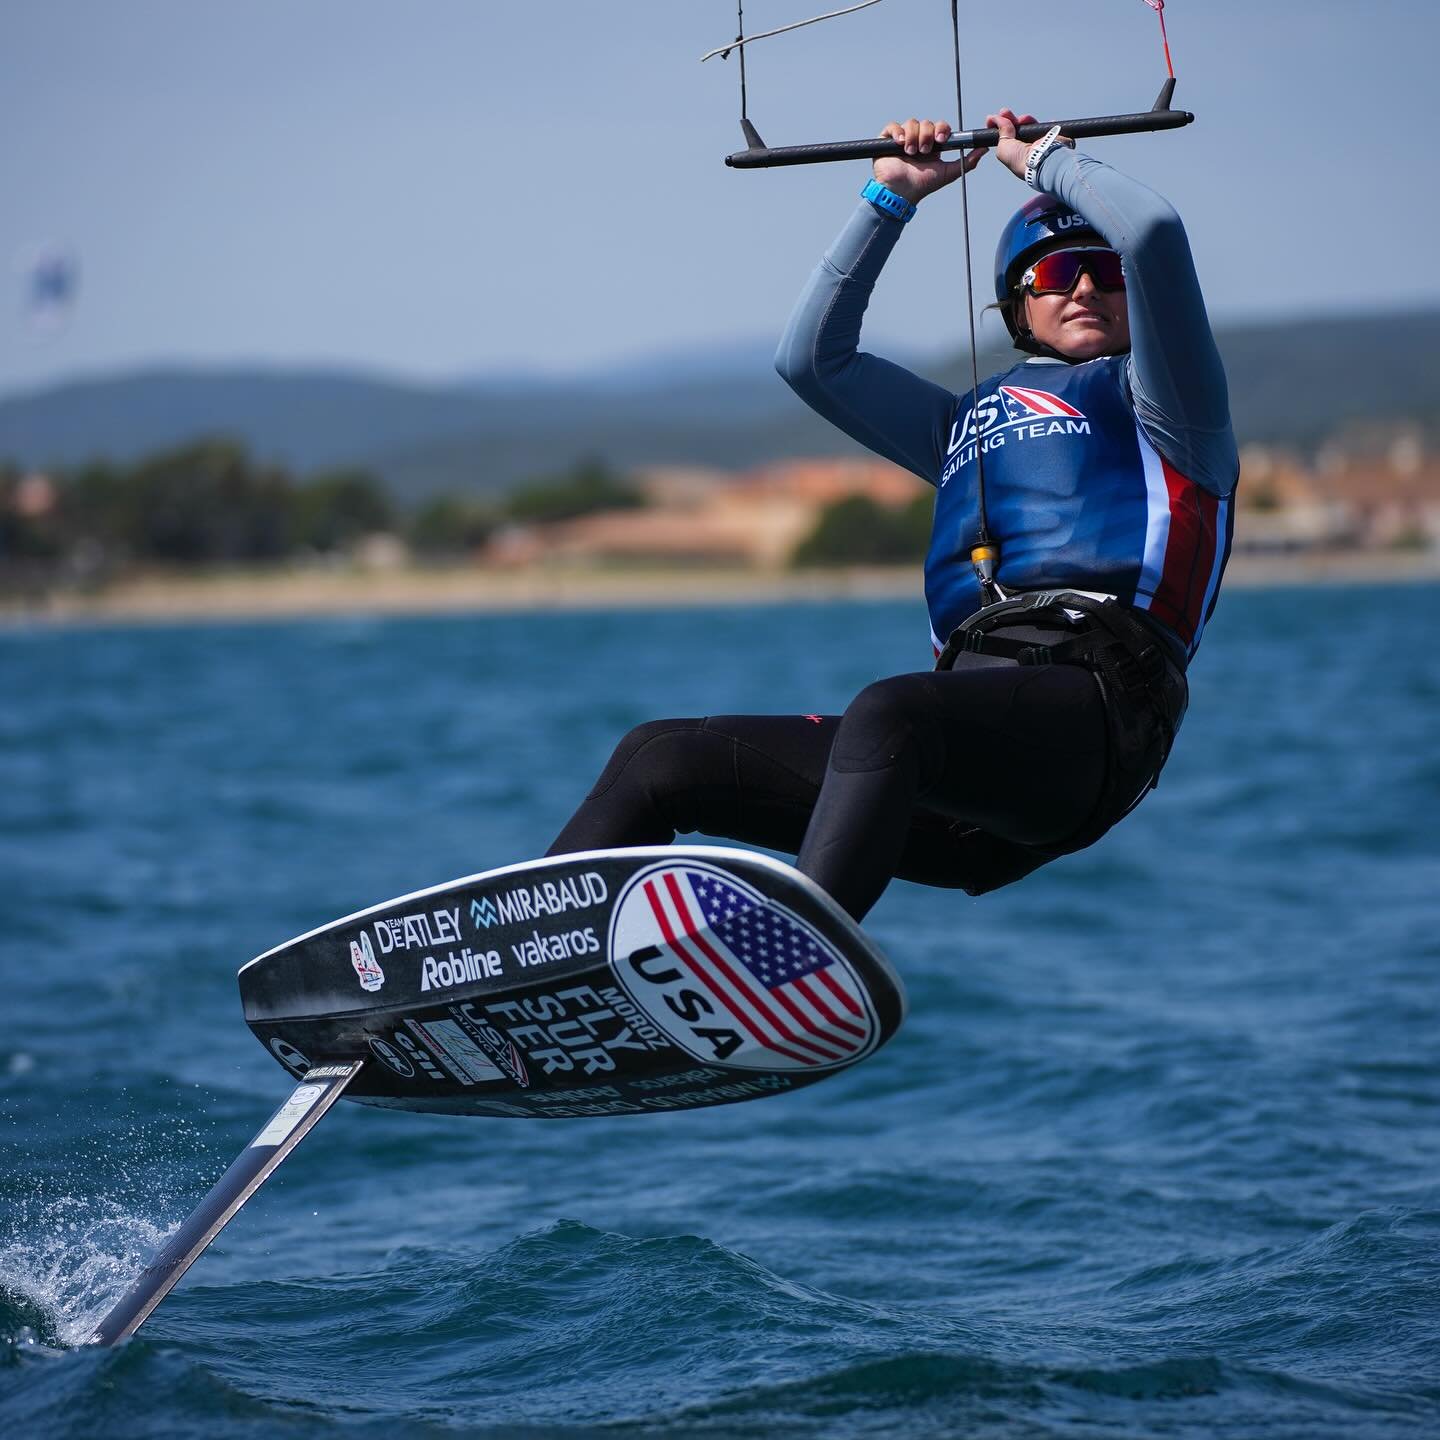 worlds prep in full swing with the team ⚡️⚡️⚡️
World Championships in Hy&eacute;res is coming up May 11-19! Follow along here, via @ussailingteam and on @kiteclasses